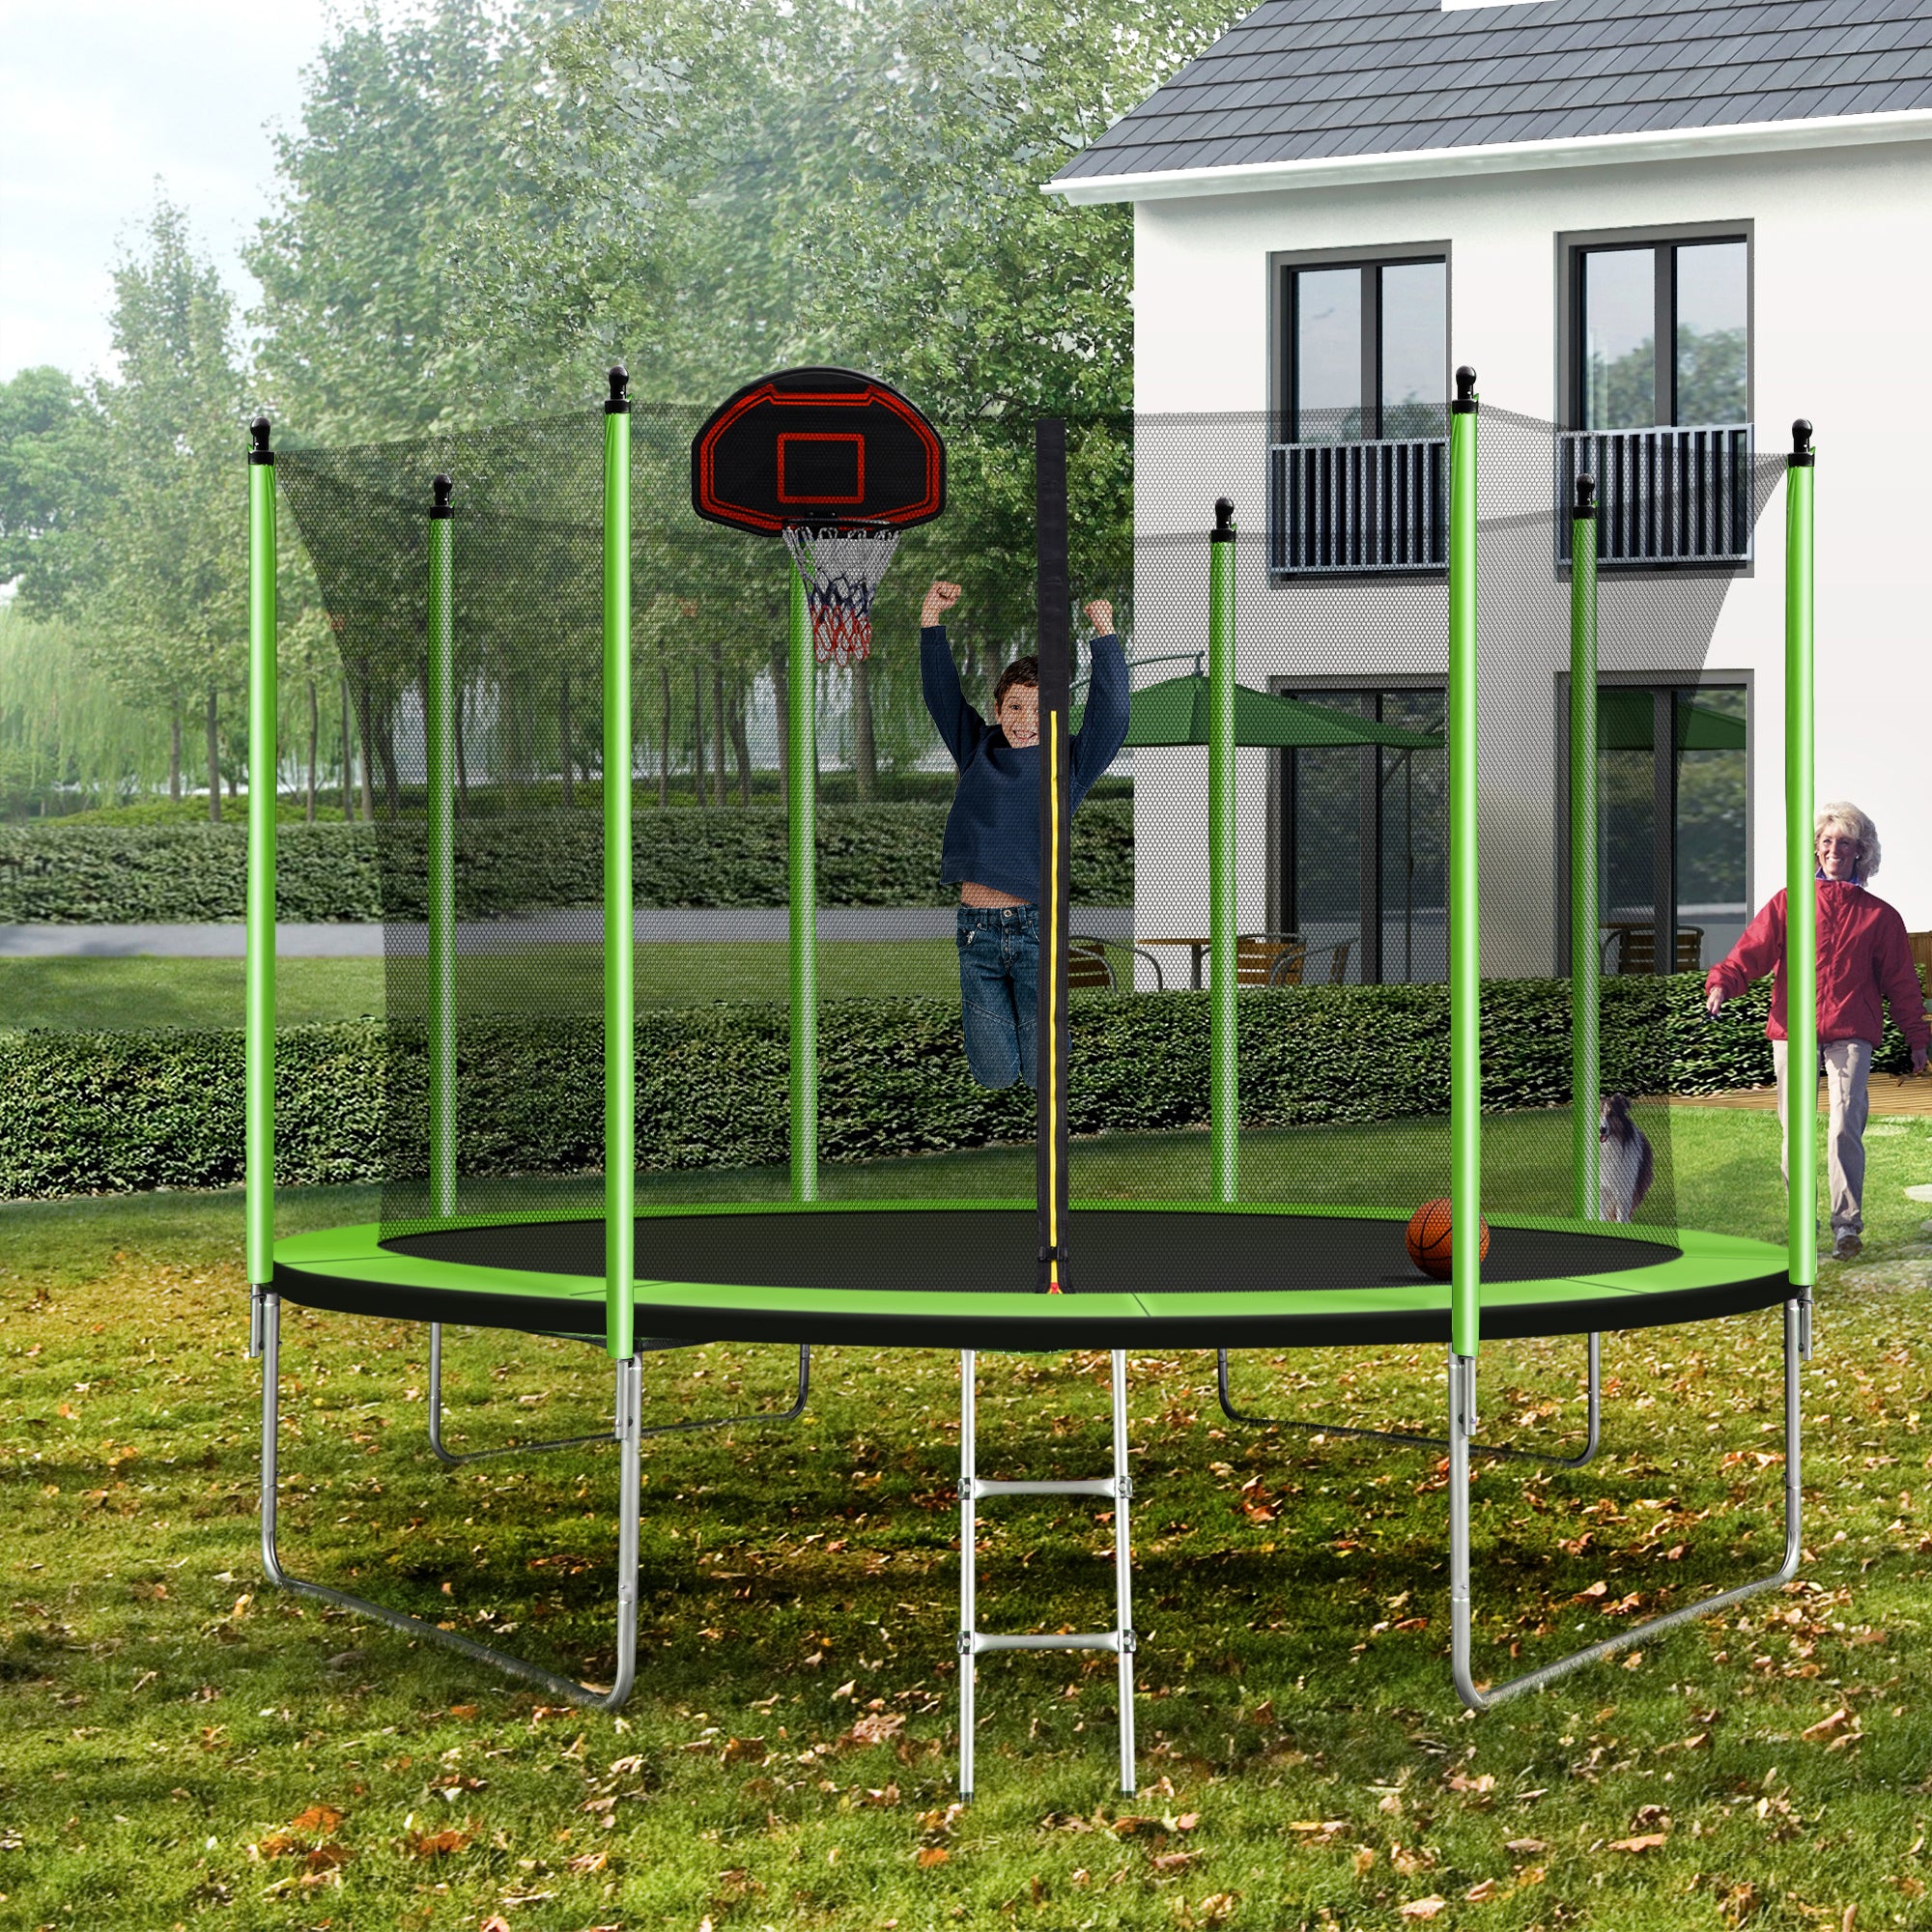 10FT Trampoline with Basketball Hoop Inflator and green-metal